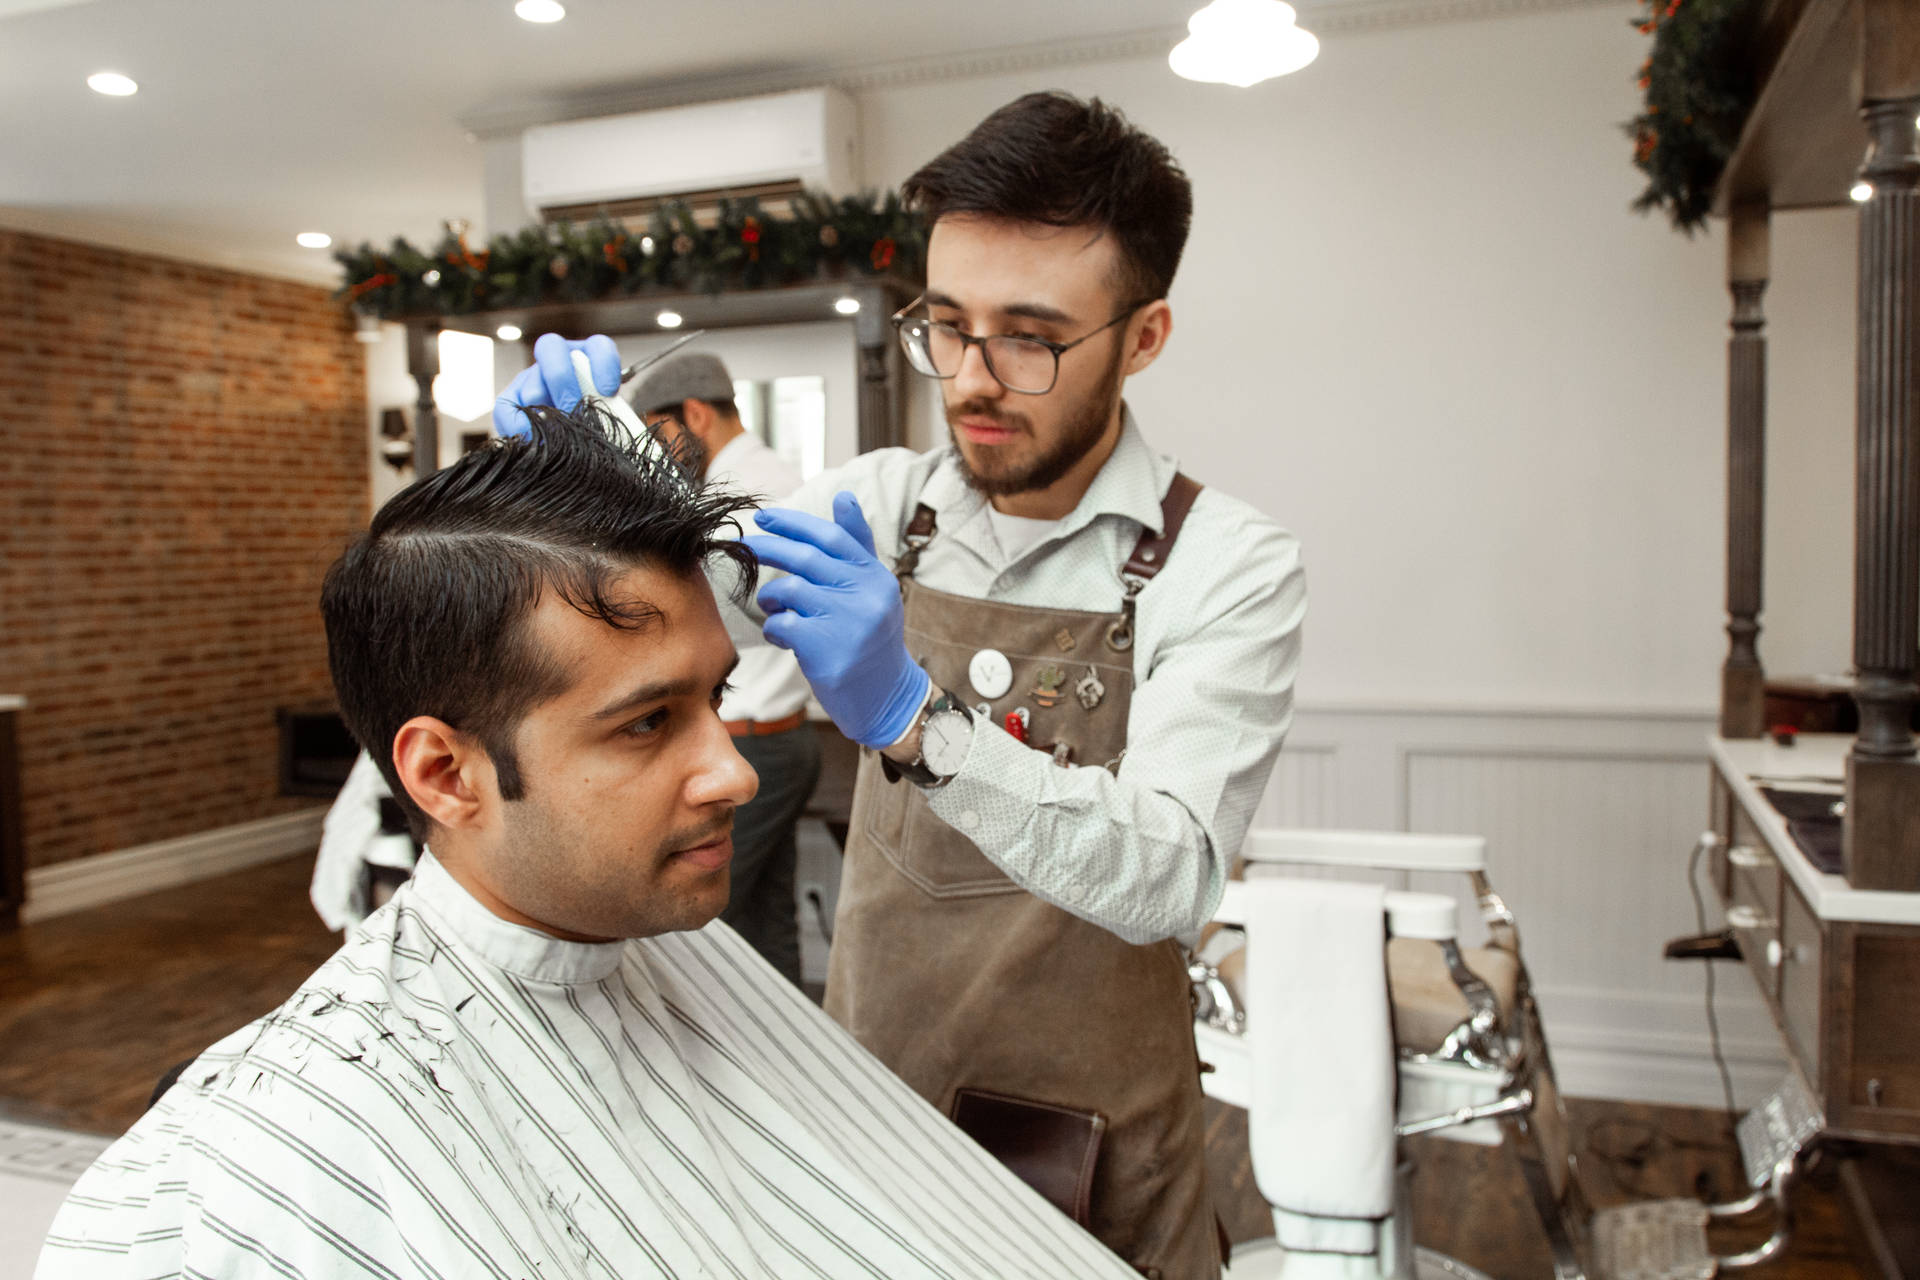 Hairdresser With Apron Performing Haircut